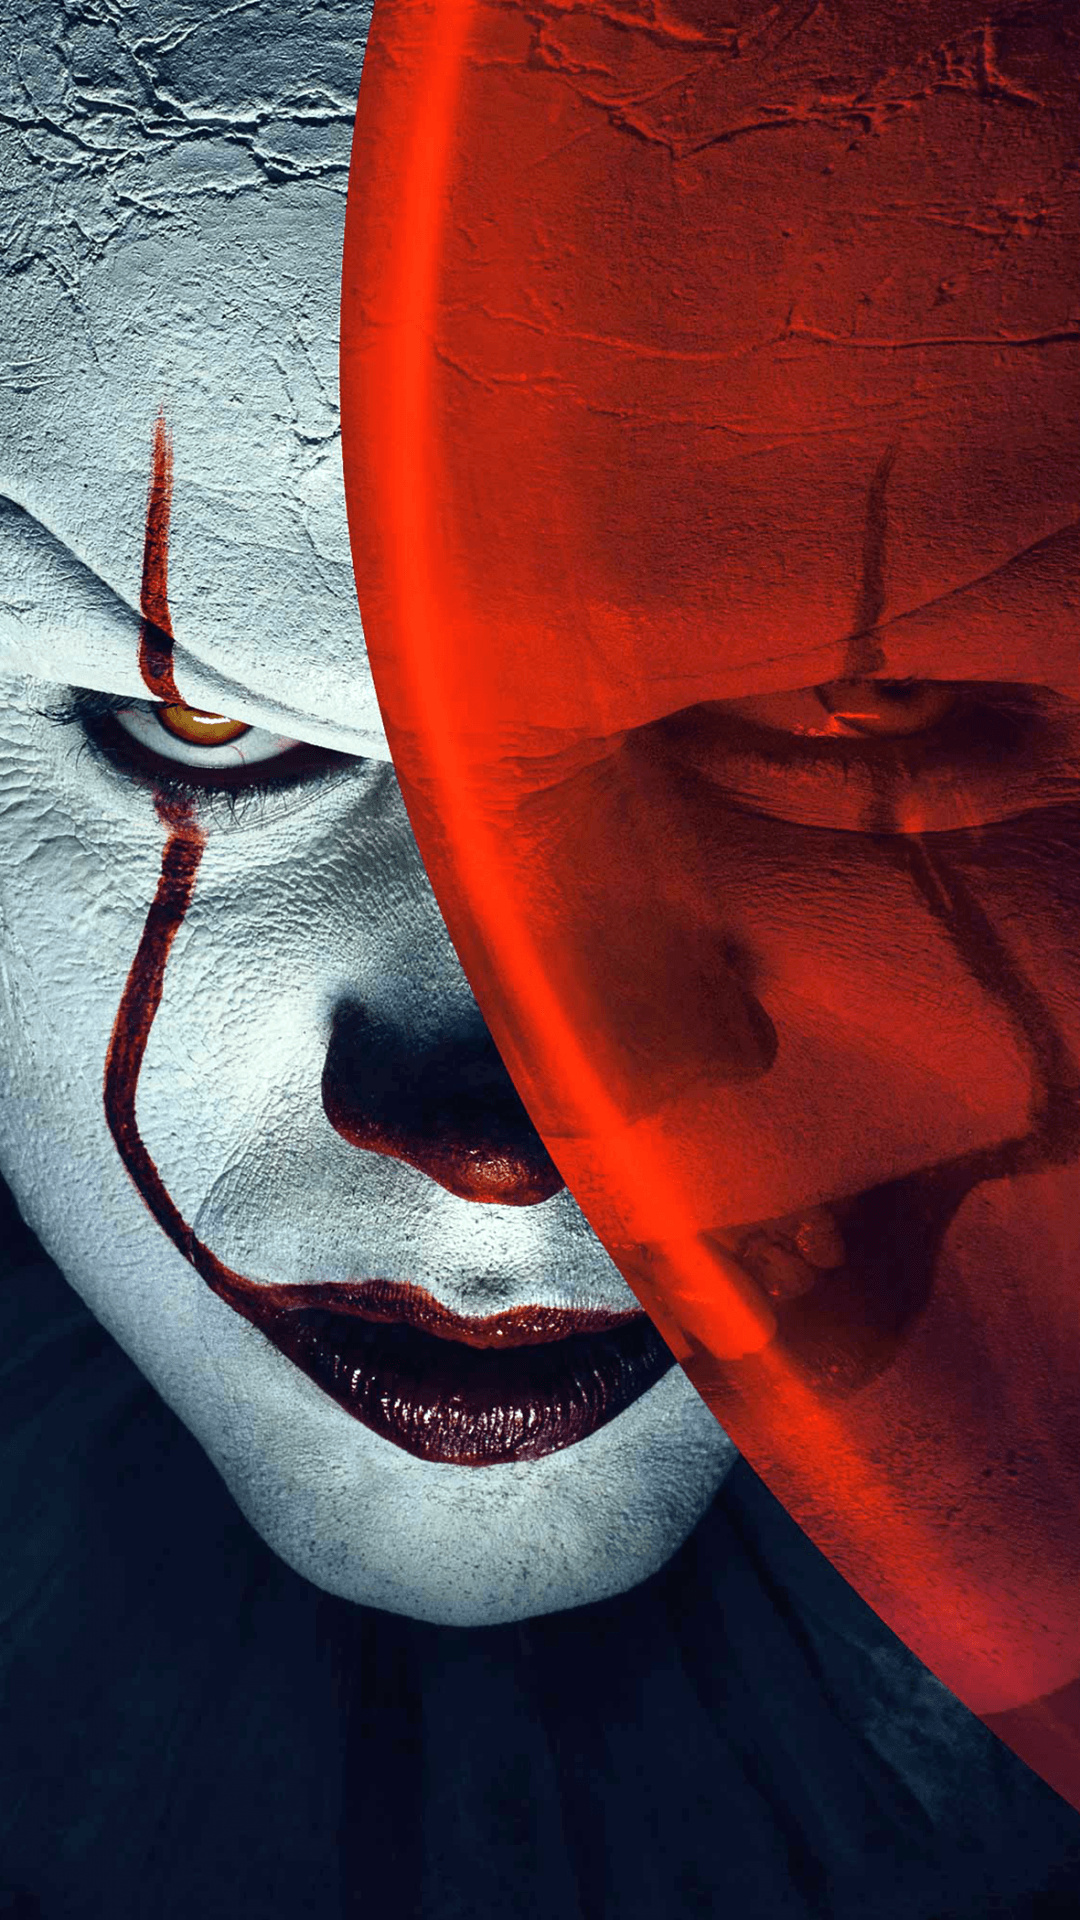 Pennywise iPhone wallpapers, Horror-themed, Terrifying visuals, Creepy clown, 1080x1920 Full HD Handy